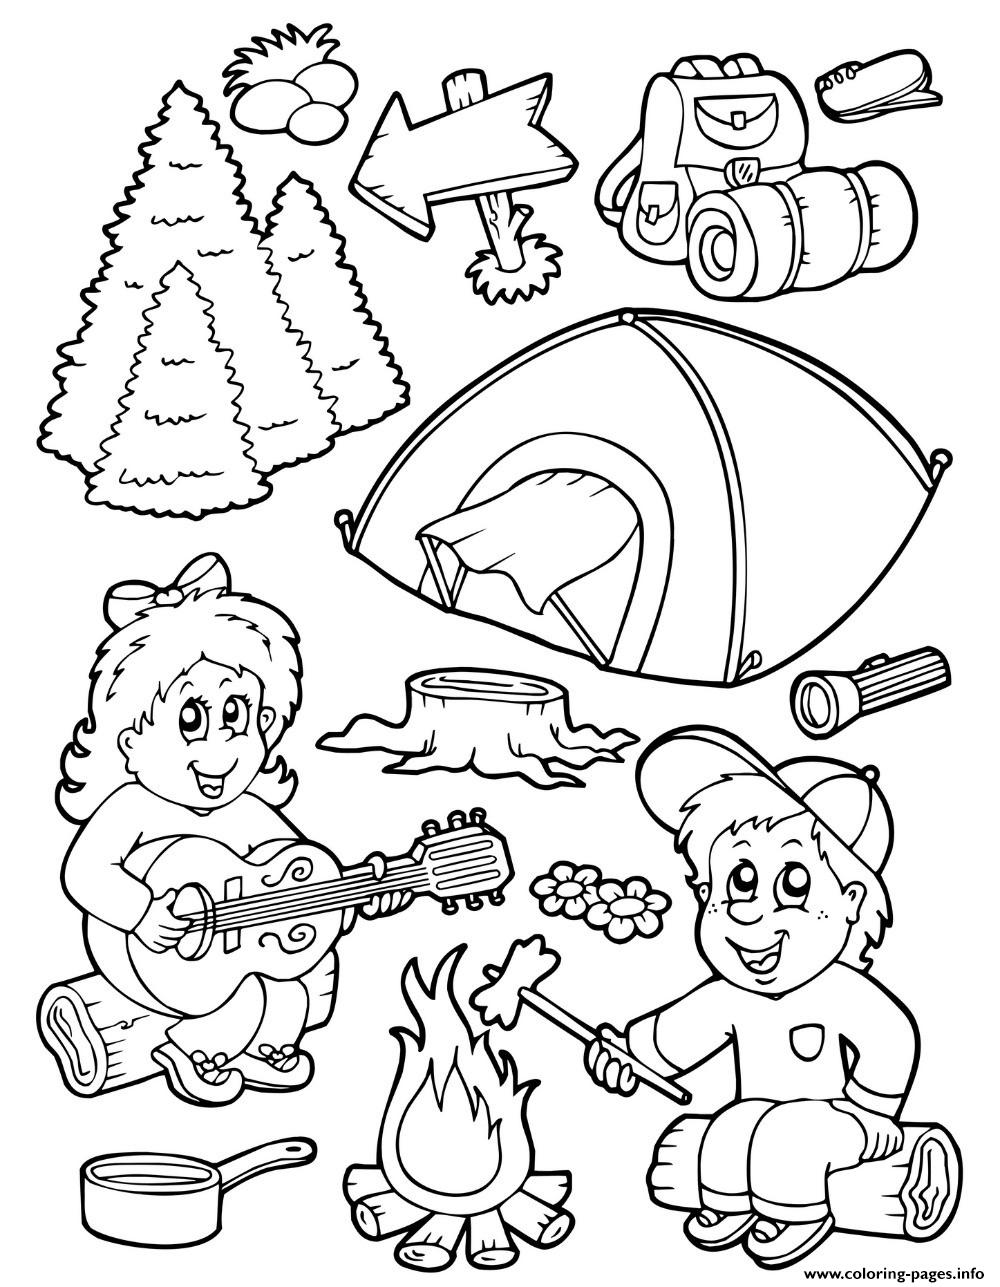 Camping For Kids coloring